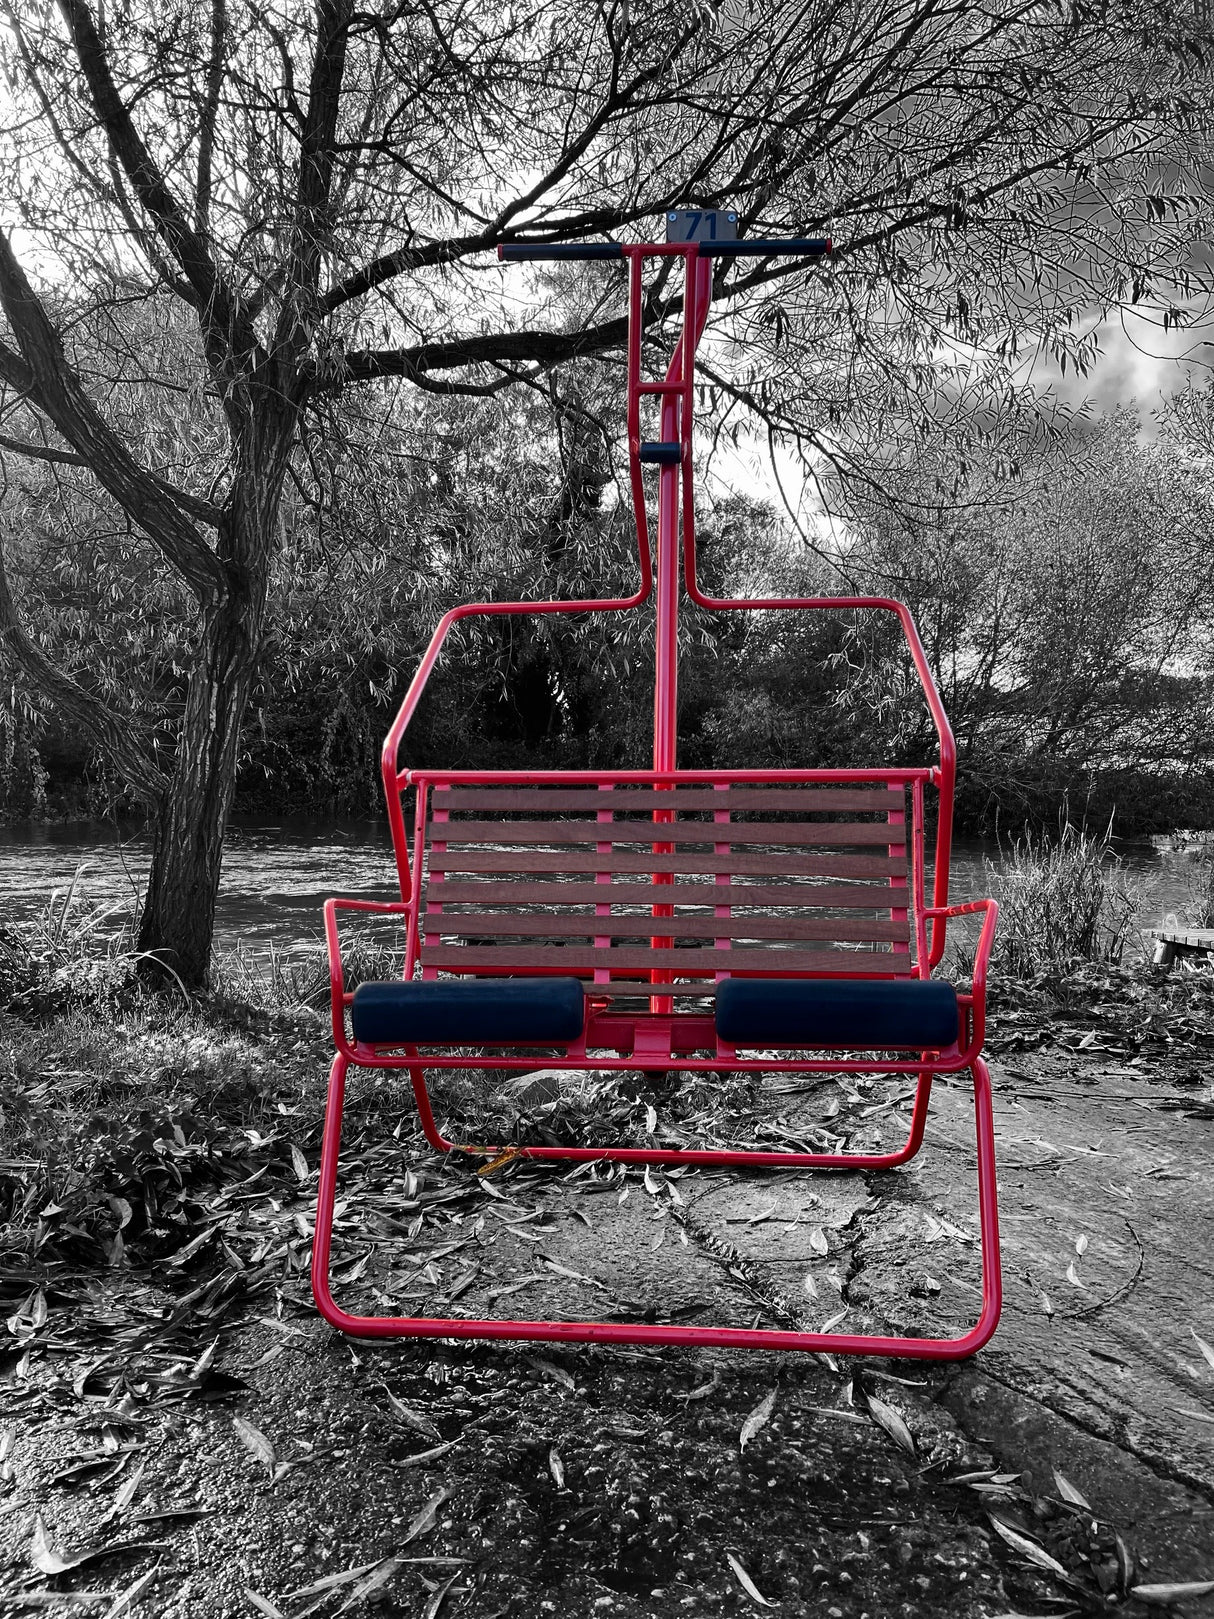 Chairlift Seats